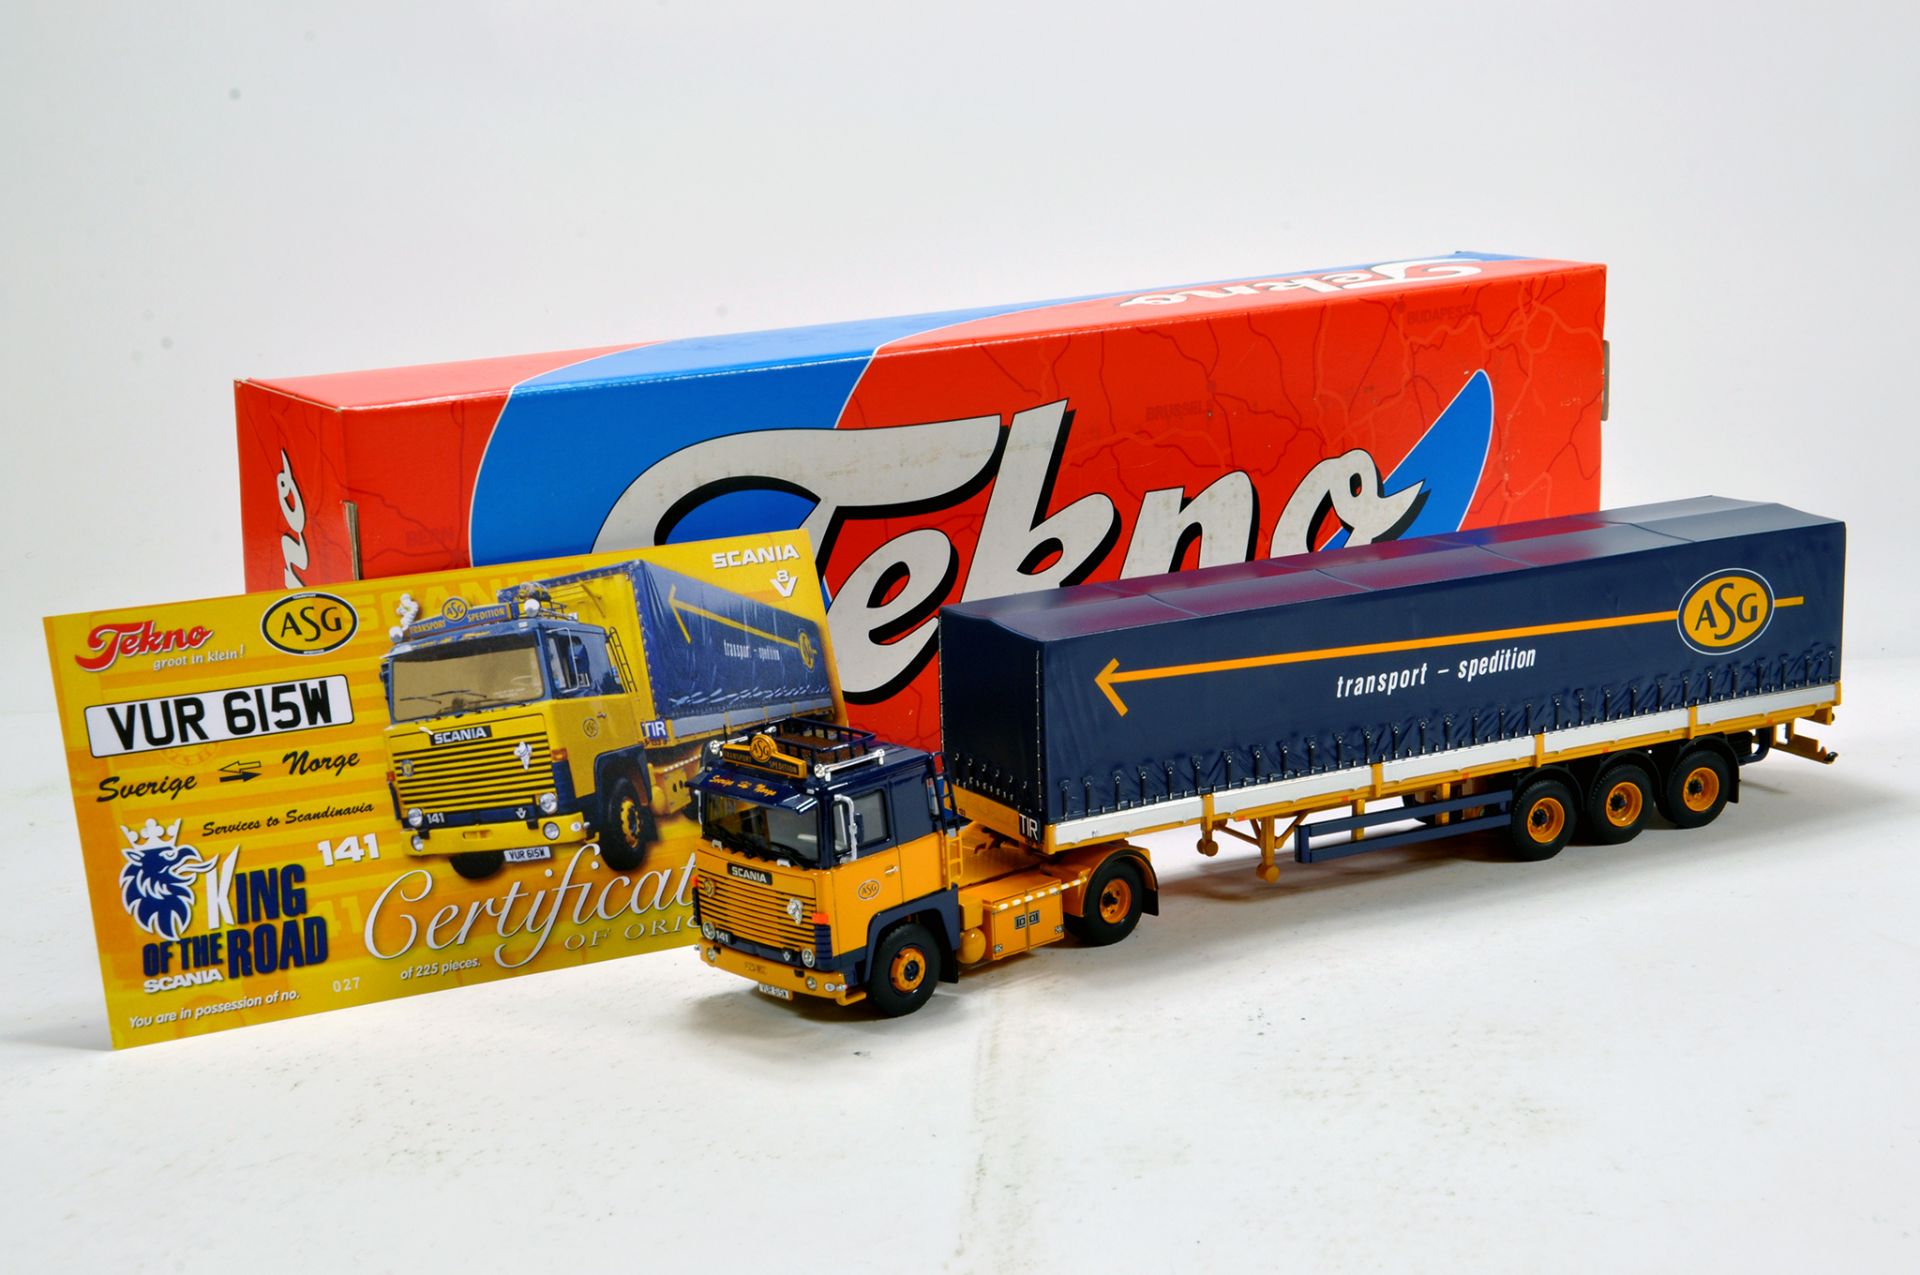 Tekno 1/50 Diecast Truck Issue Comprising Scania 141 Curtain Trailer in livery of ASG. Limited